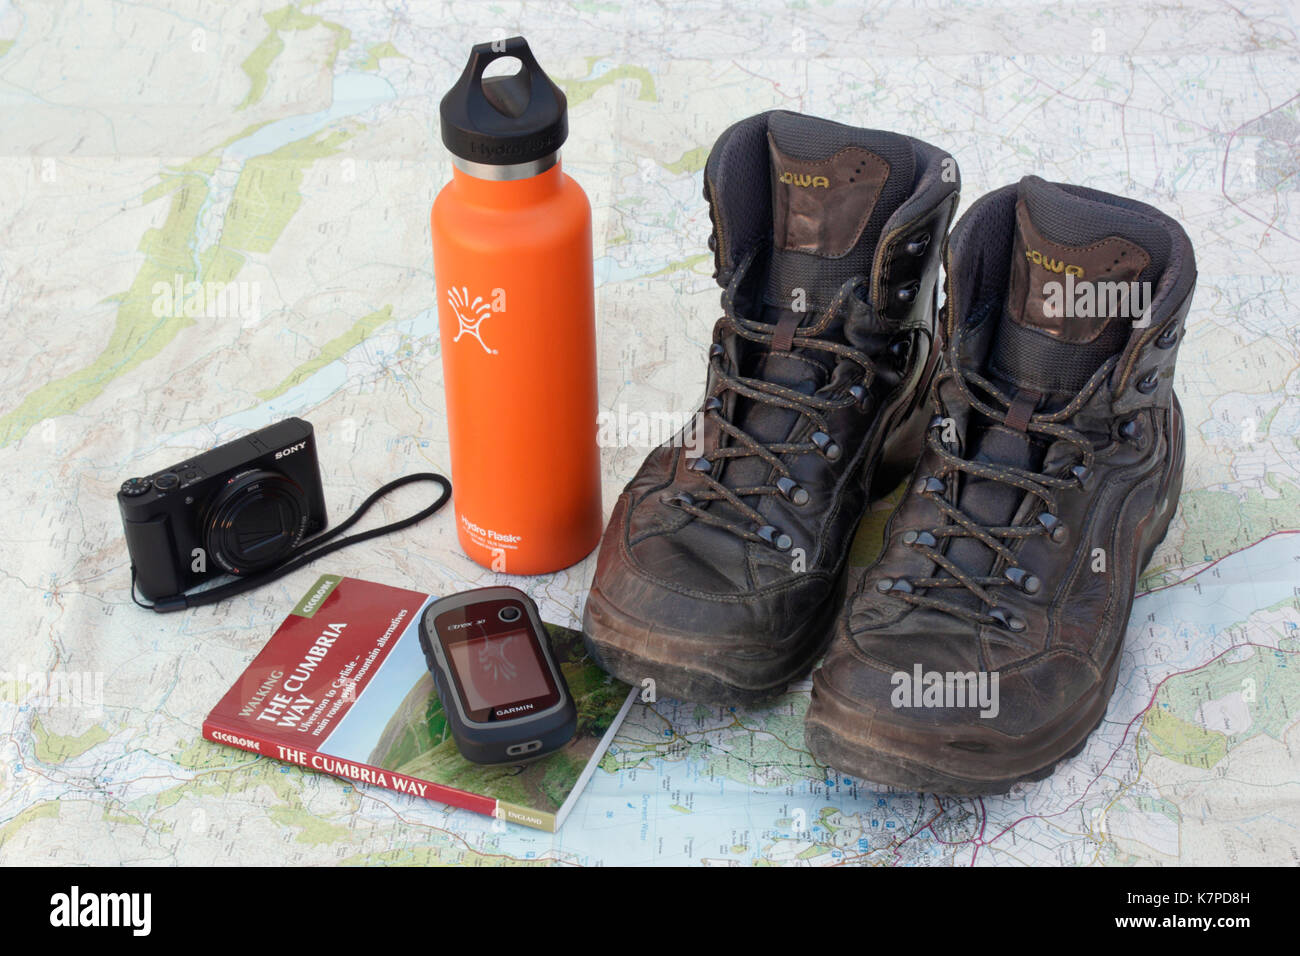 Preparing to walk the Cumbria Way. Hiking boots, water bottle, camera, handheld GPS unit and guidebook on an Ordnance Survey map of the Lake District Stock Photo